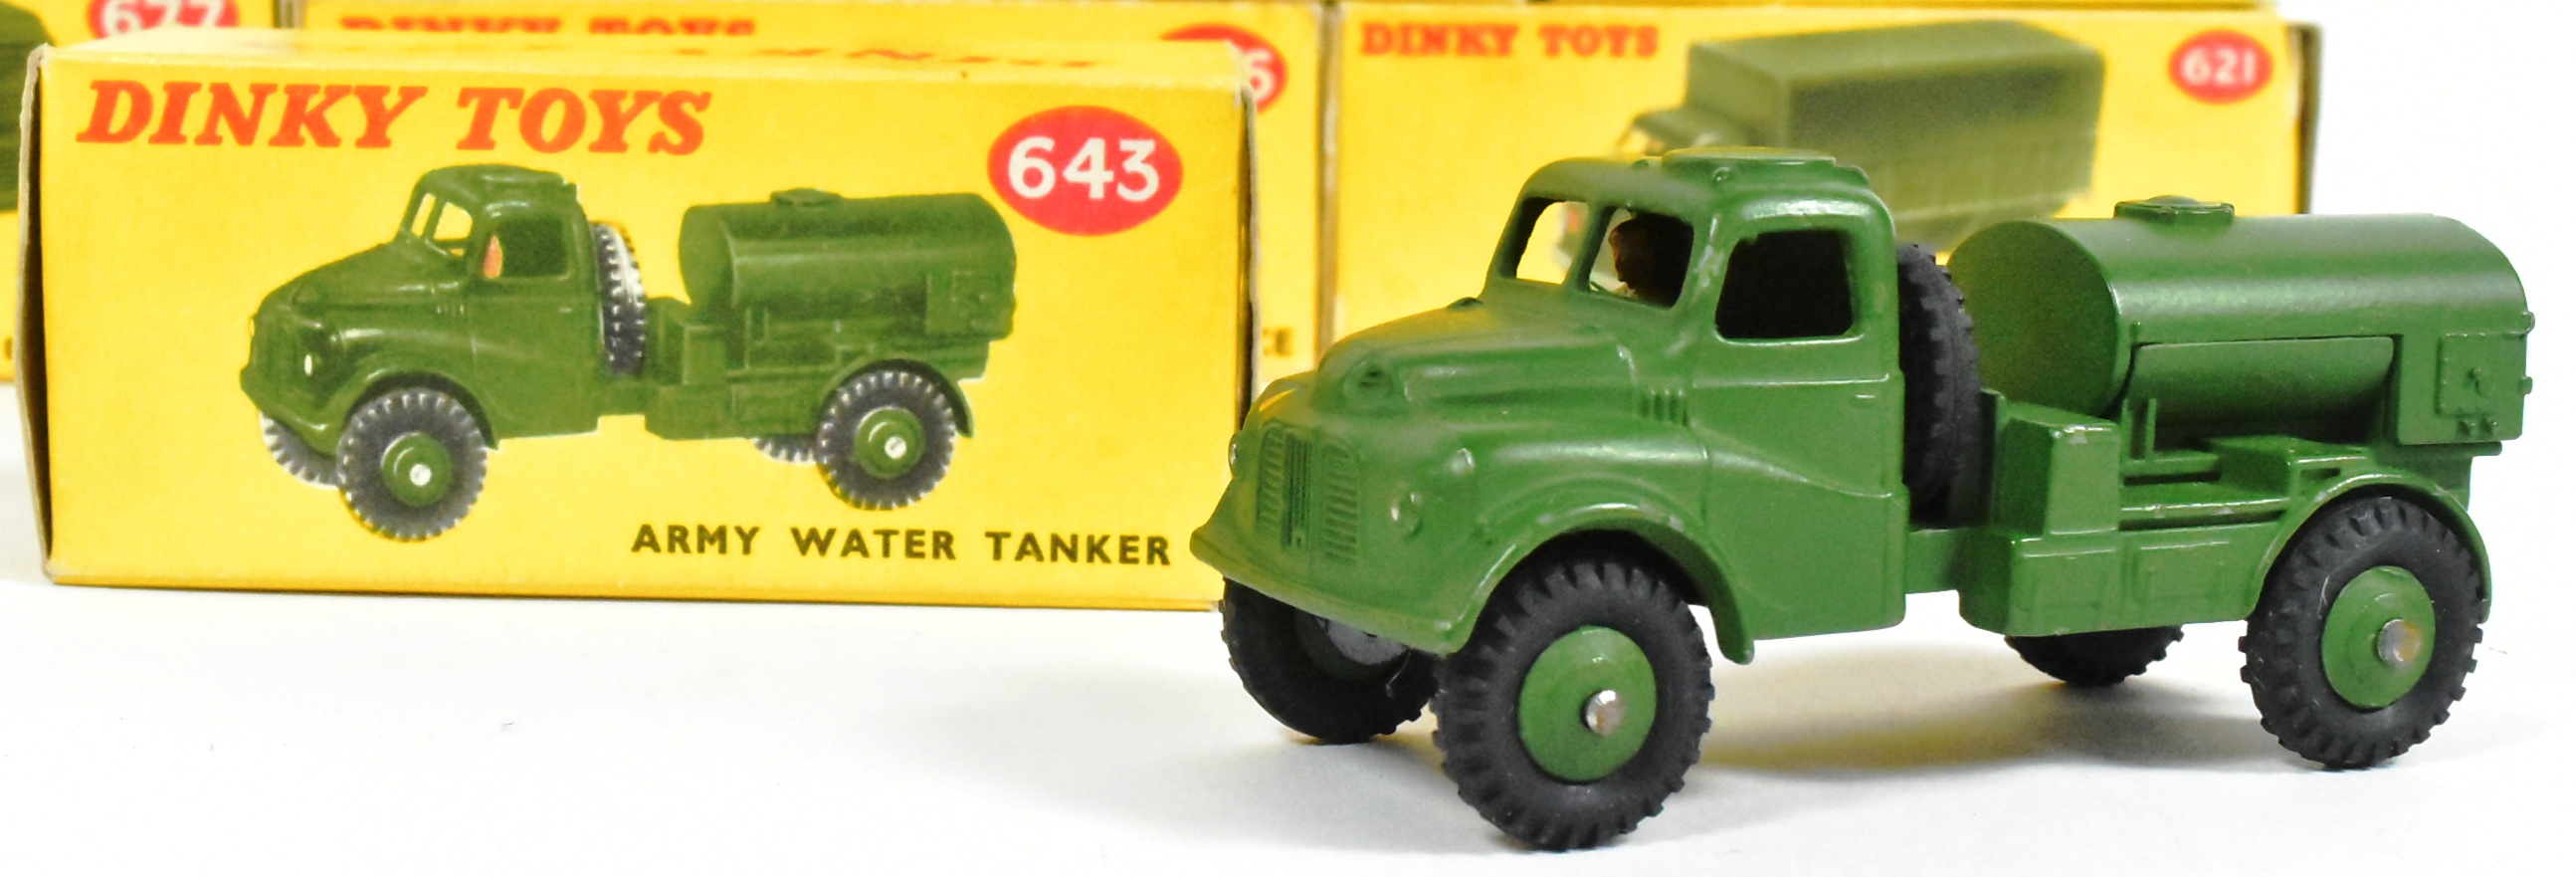 DIECAST - COLLECTION OF DINKY TOYS DIECAST MILITARY MODELS - Image 5 of 5